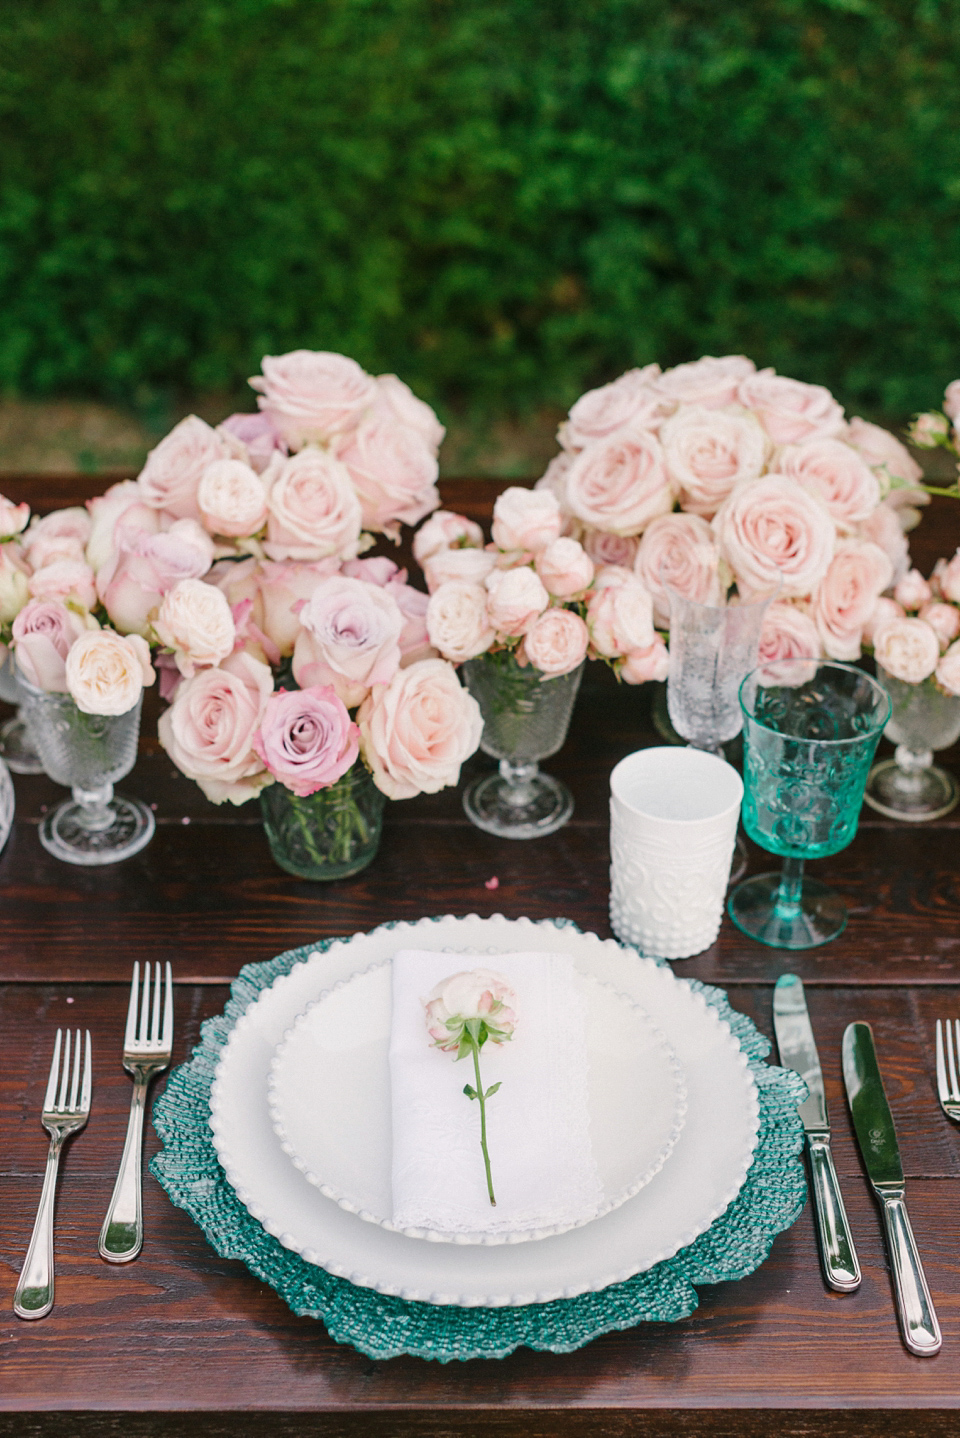 Introducing Duchess & Butler – distinctive and beautiful tablescape décor for weddings.